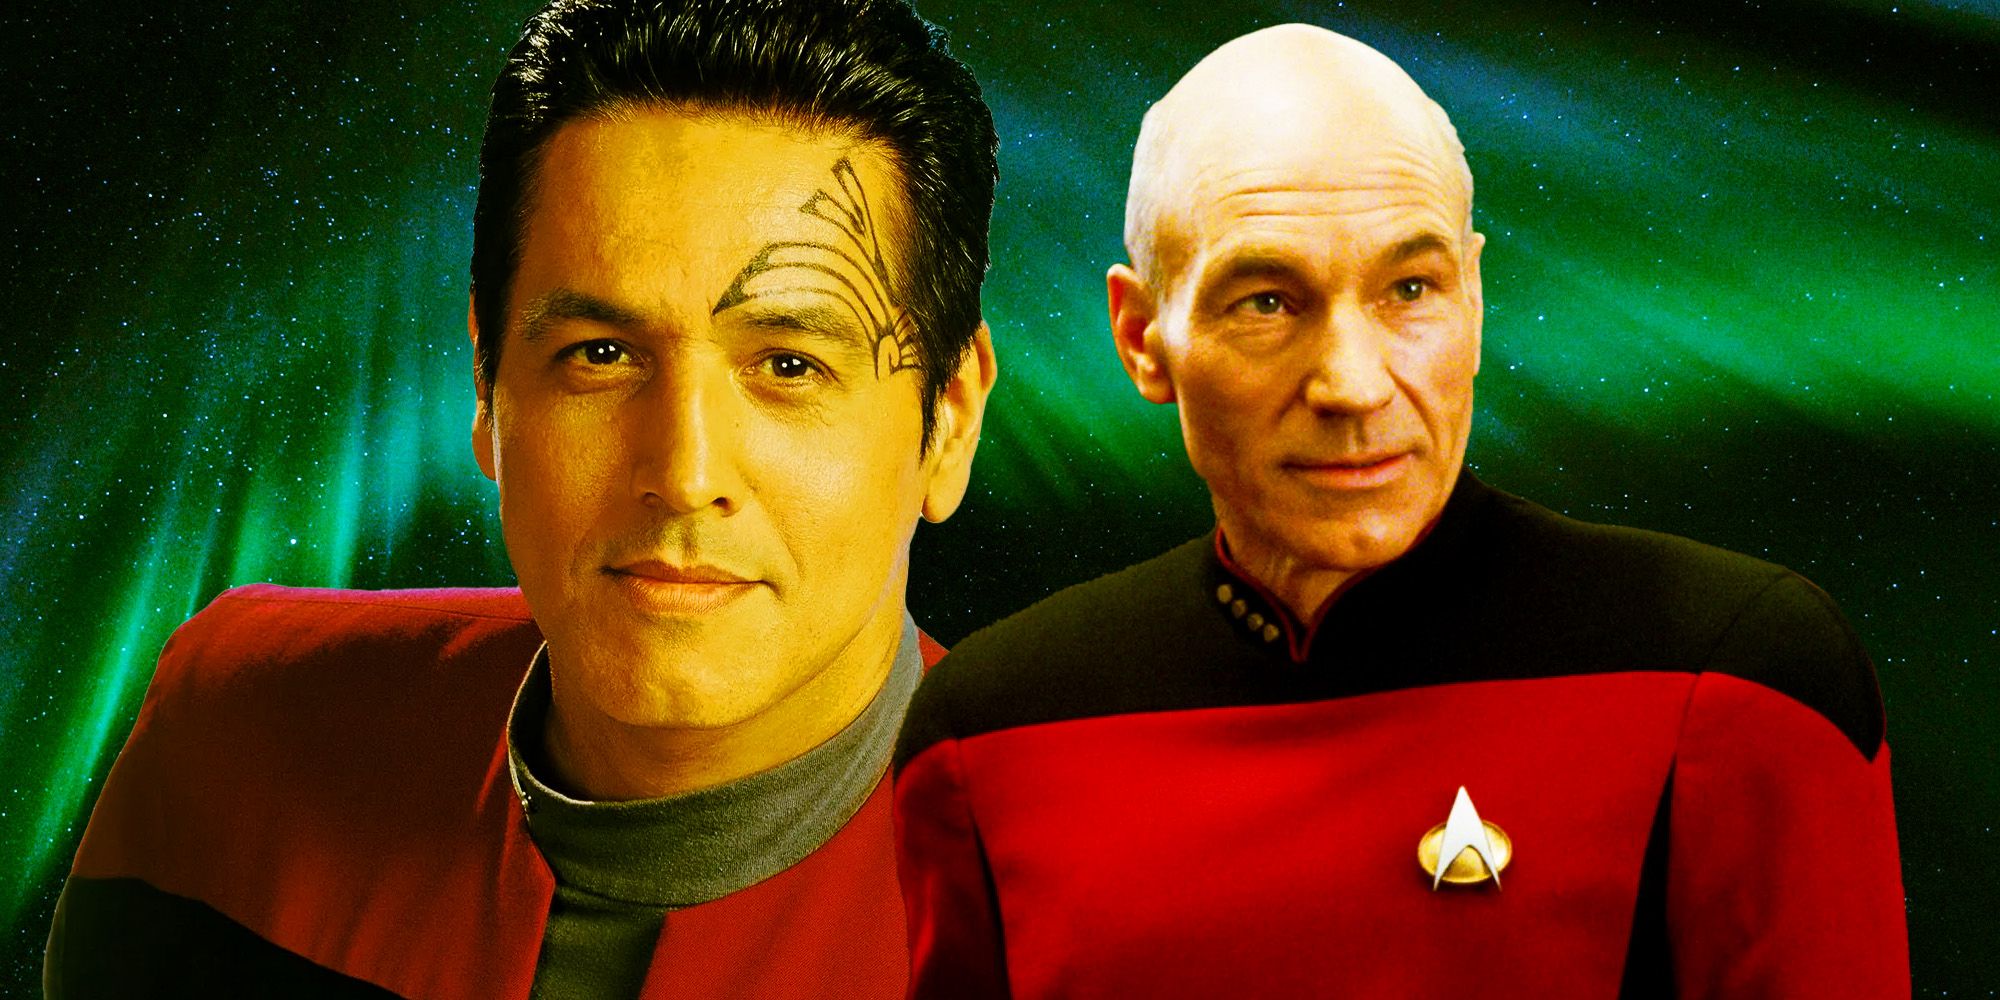 Commander Chakotay and Captain Picard from Star Trek: Voyager and TNG.